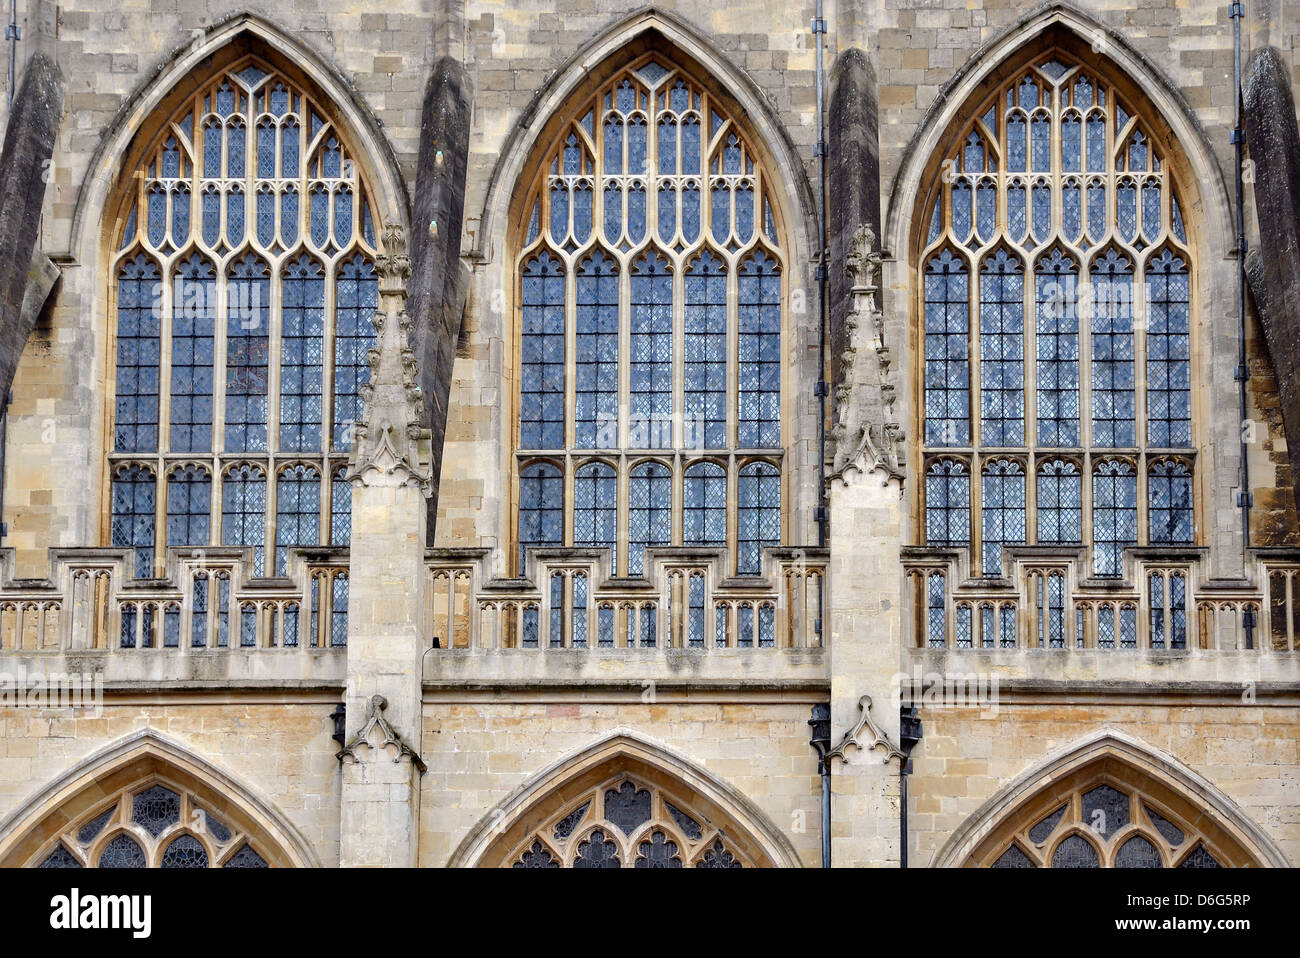 South side of Bath Abbey, Bath, Somerset showing perpendicular (rectilinear) style windows. Stock Photo